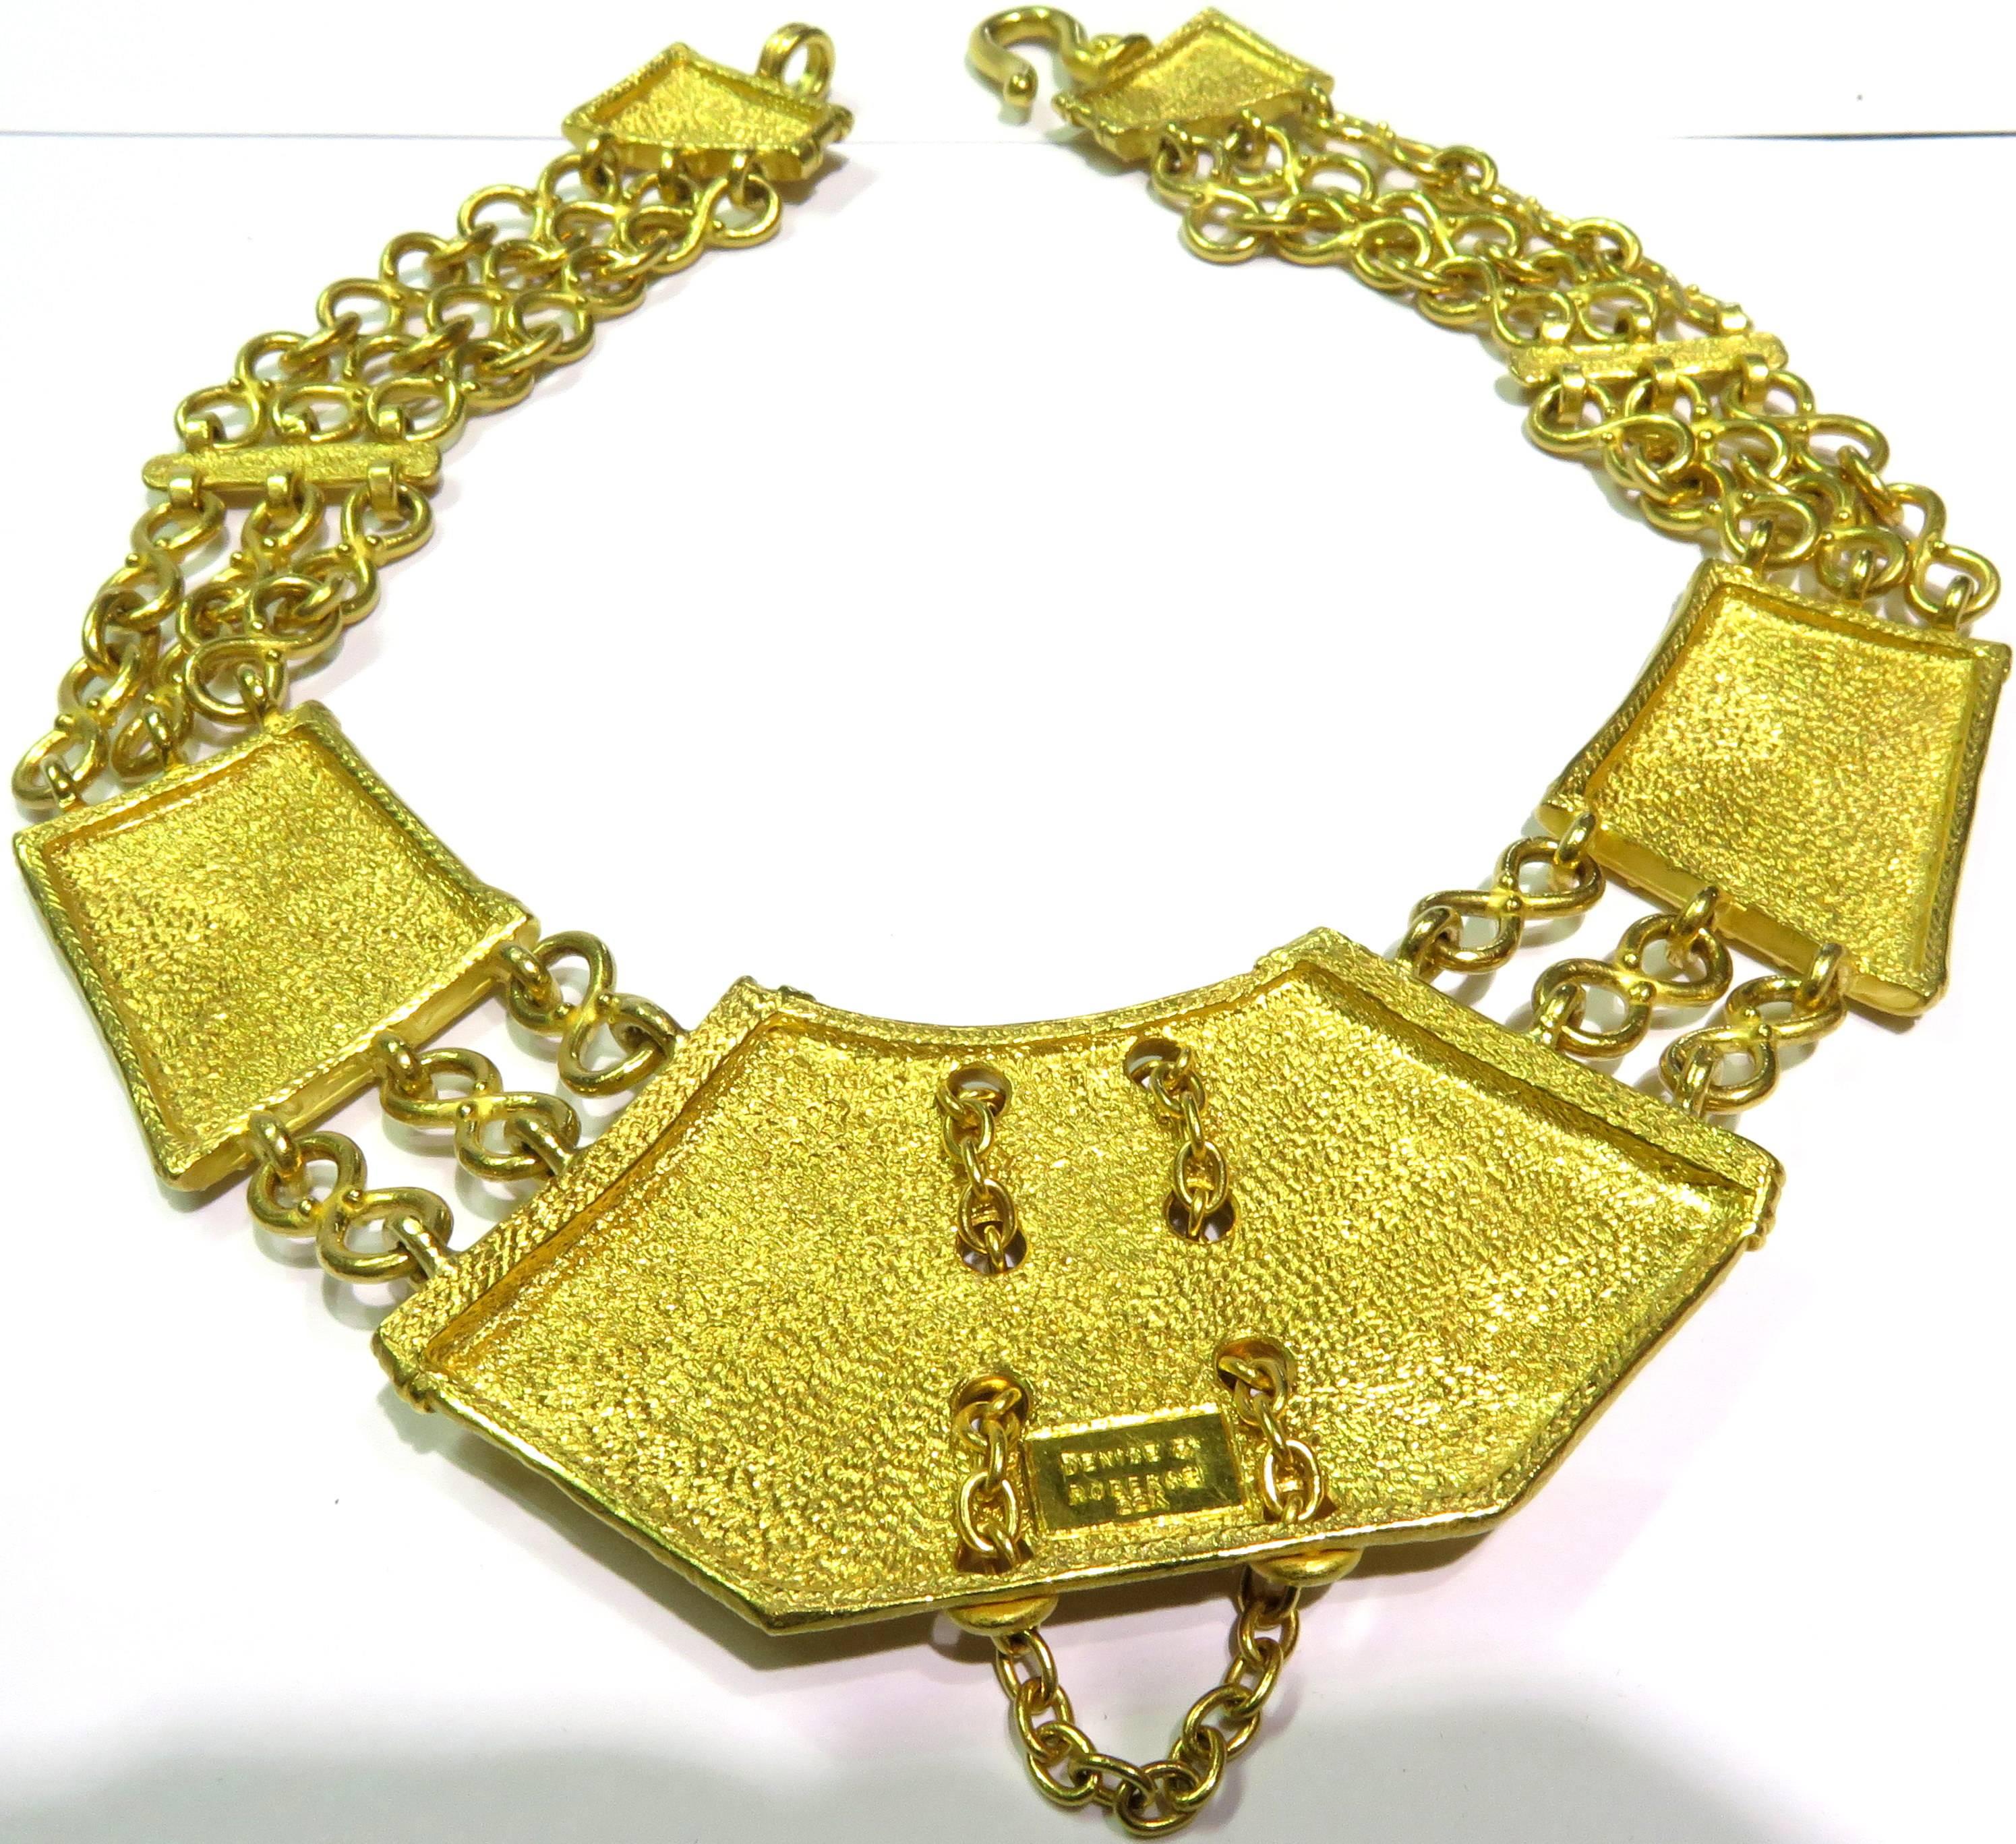 Women's or Men's Extraordinary Denise Roberge Edgy Gold Corset Necklace